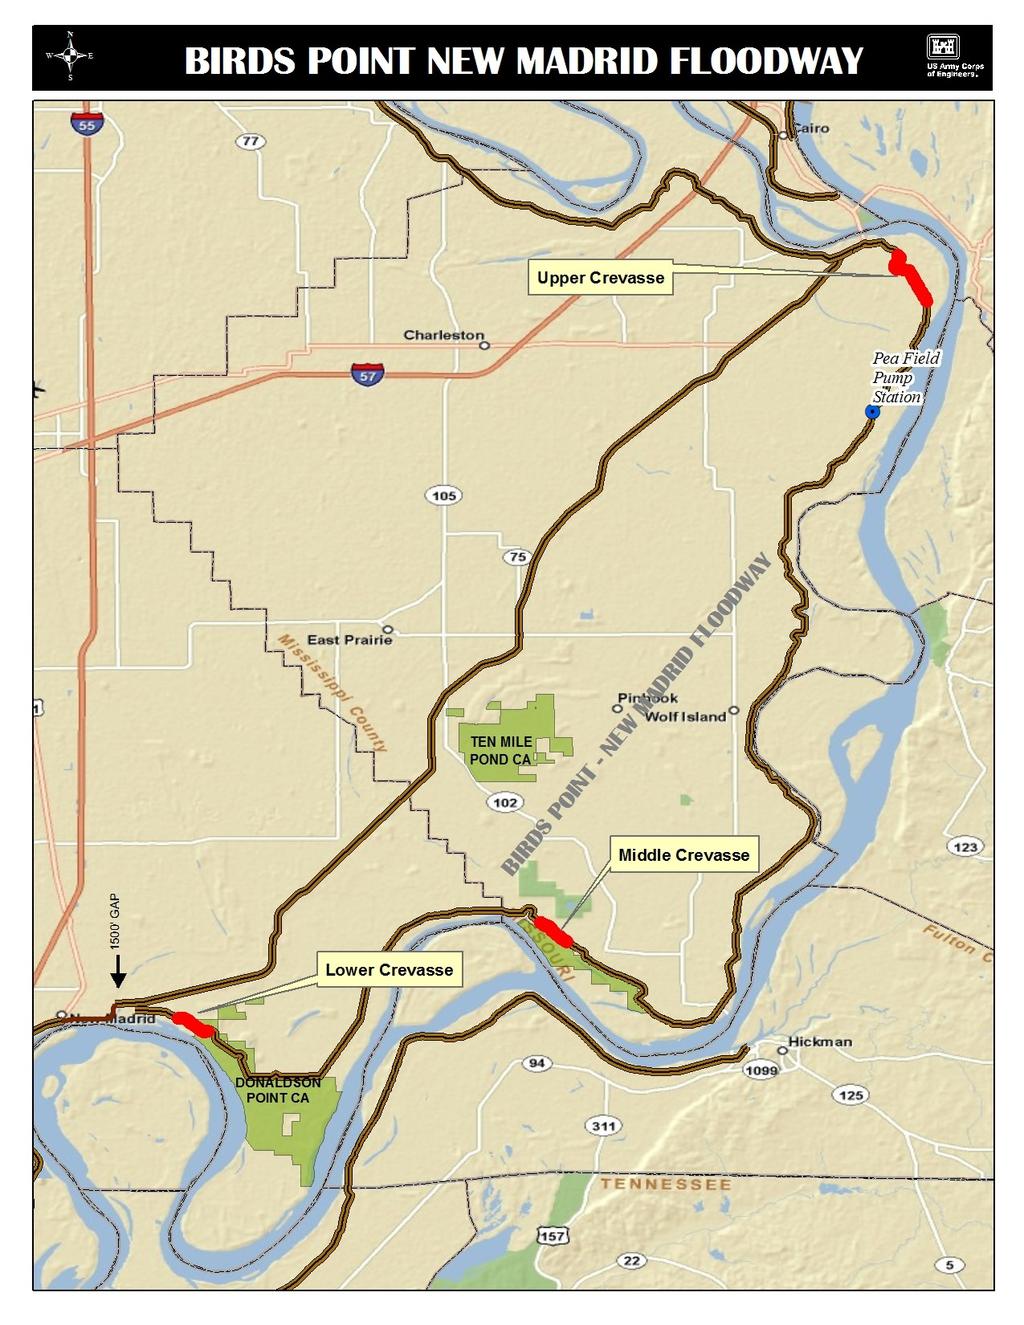 T he Birds Point-New Madrid floodway is designed to prevent the MR&T project design flood from exceeding the design elevation on the Mississippi River levees in the vicinity of the confluence of the